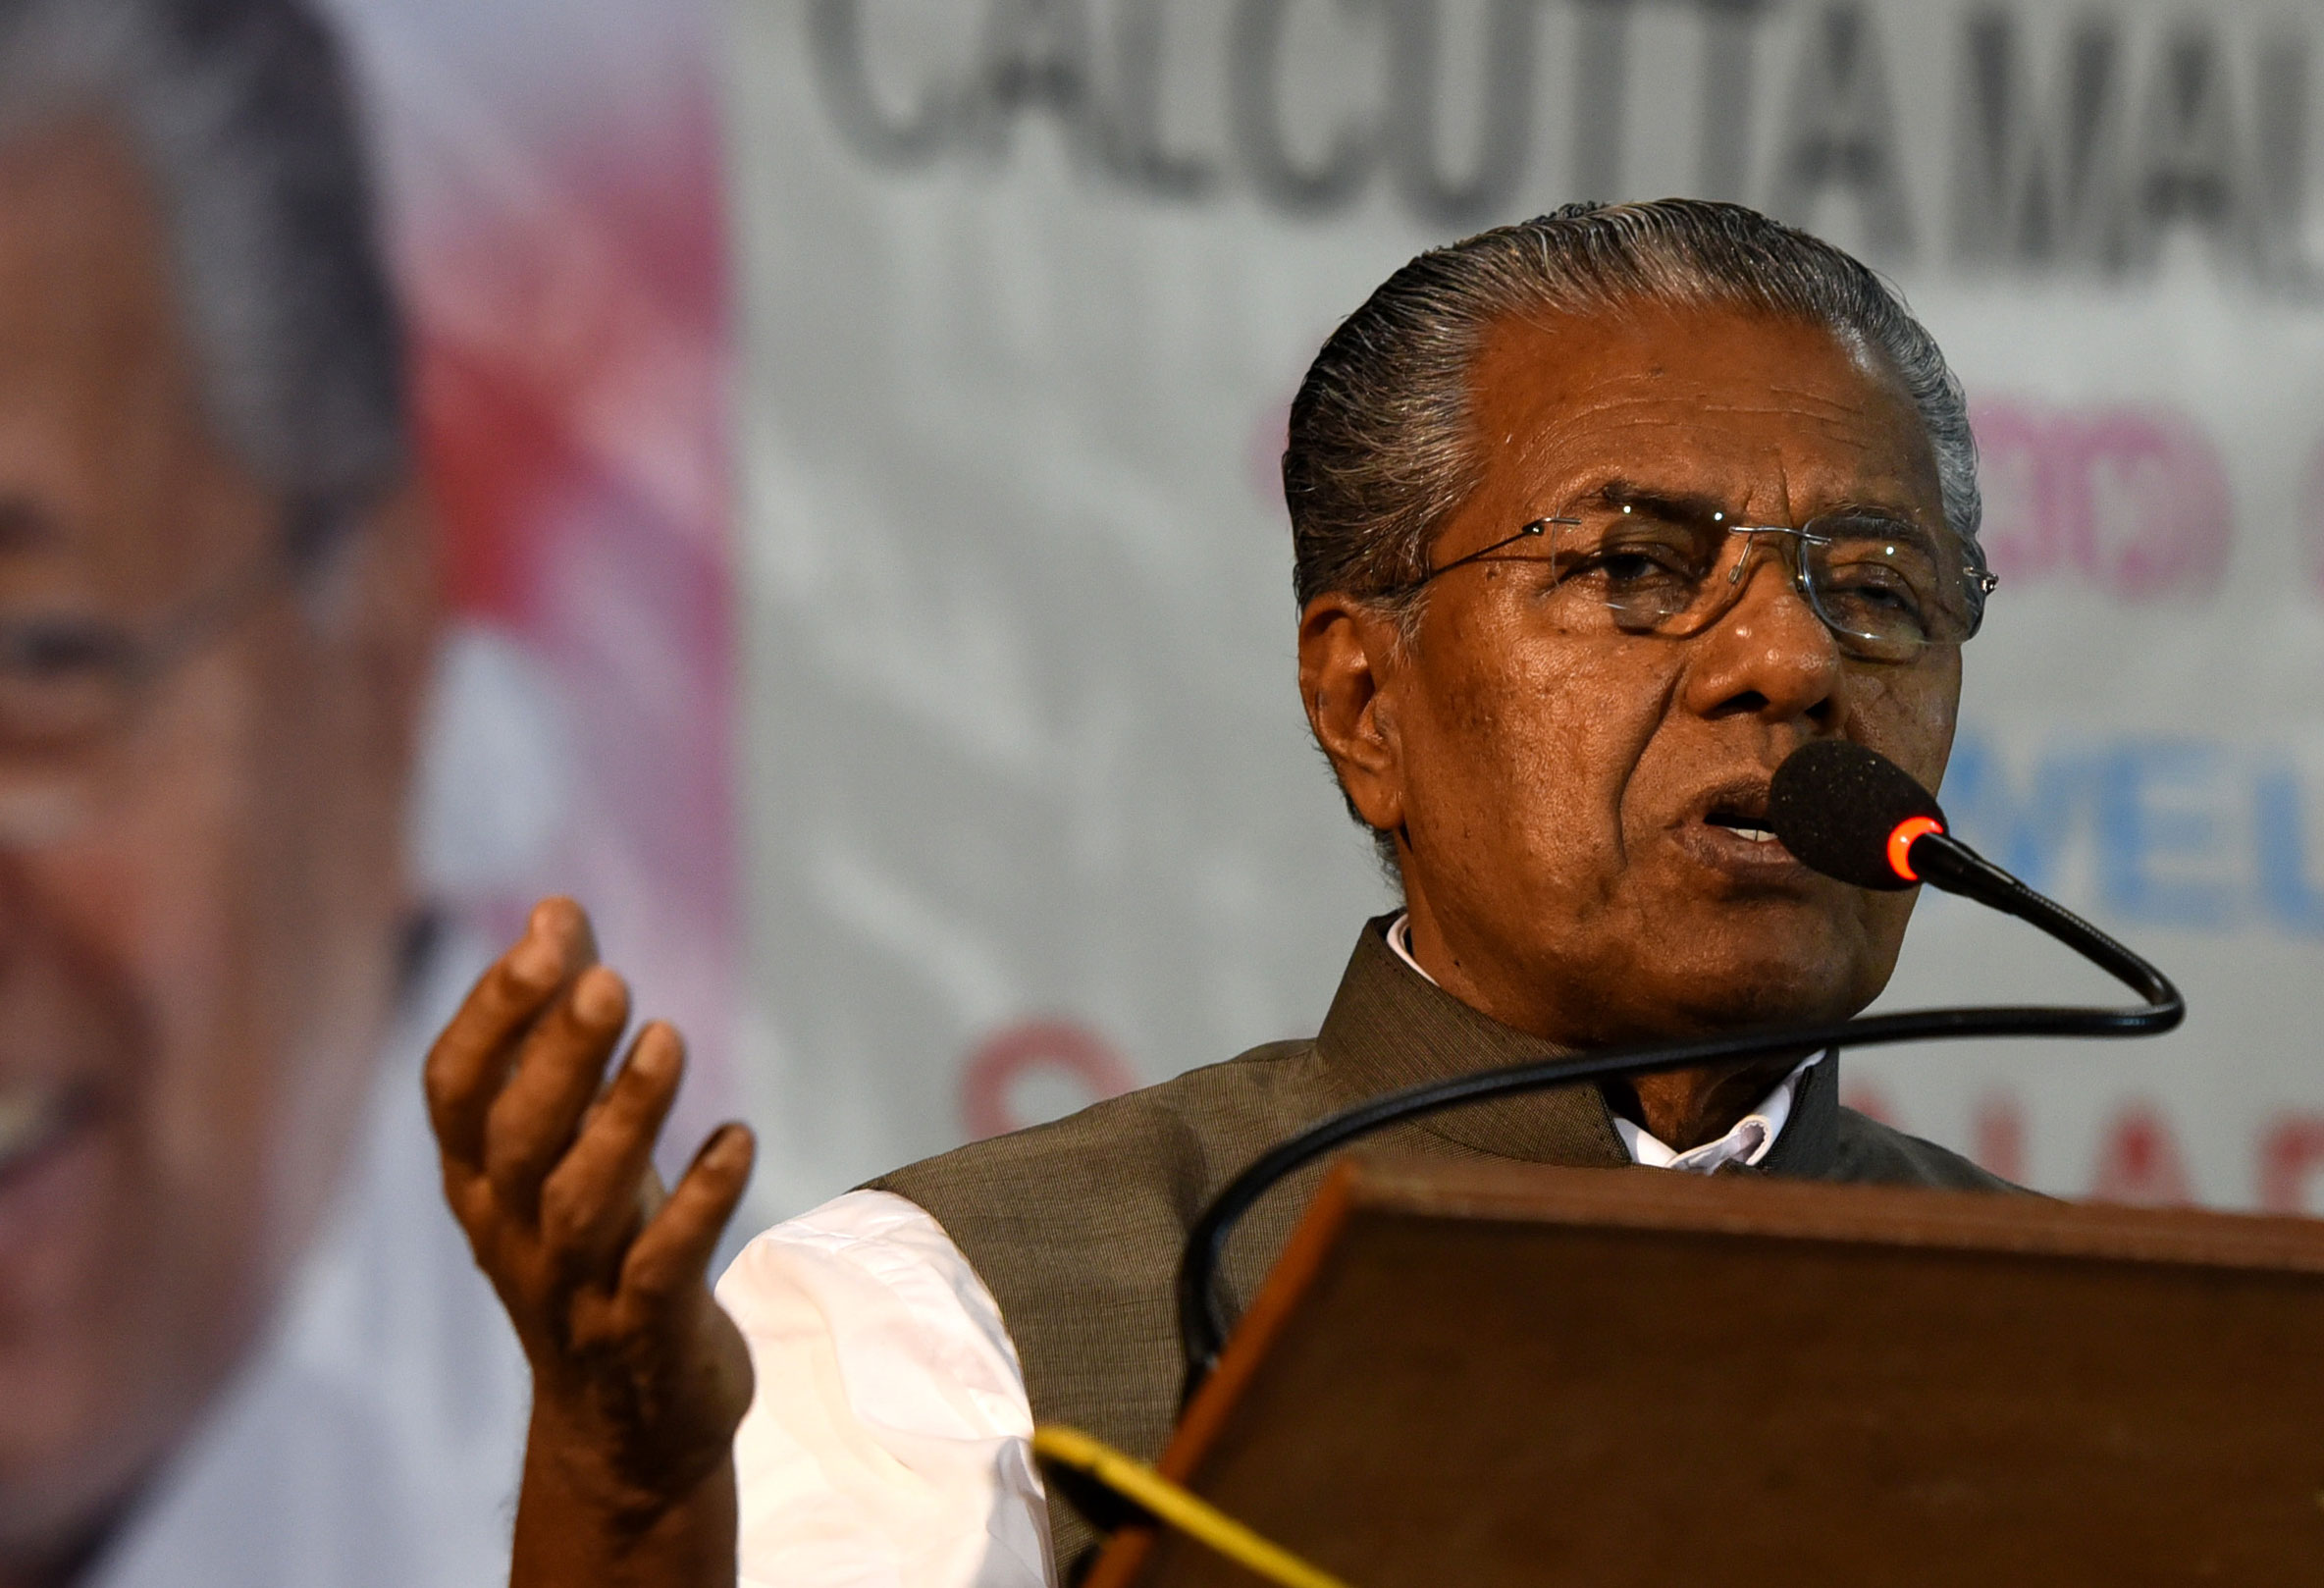 The previous evening, chief minister Pinarayi Vijayan had written to railway minister Piyush Goyal that the railways were not always informing his government in time about incoming trains —a complaint echoed in some other states too.

